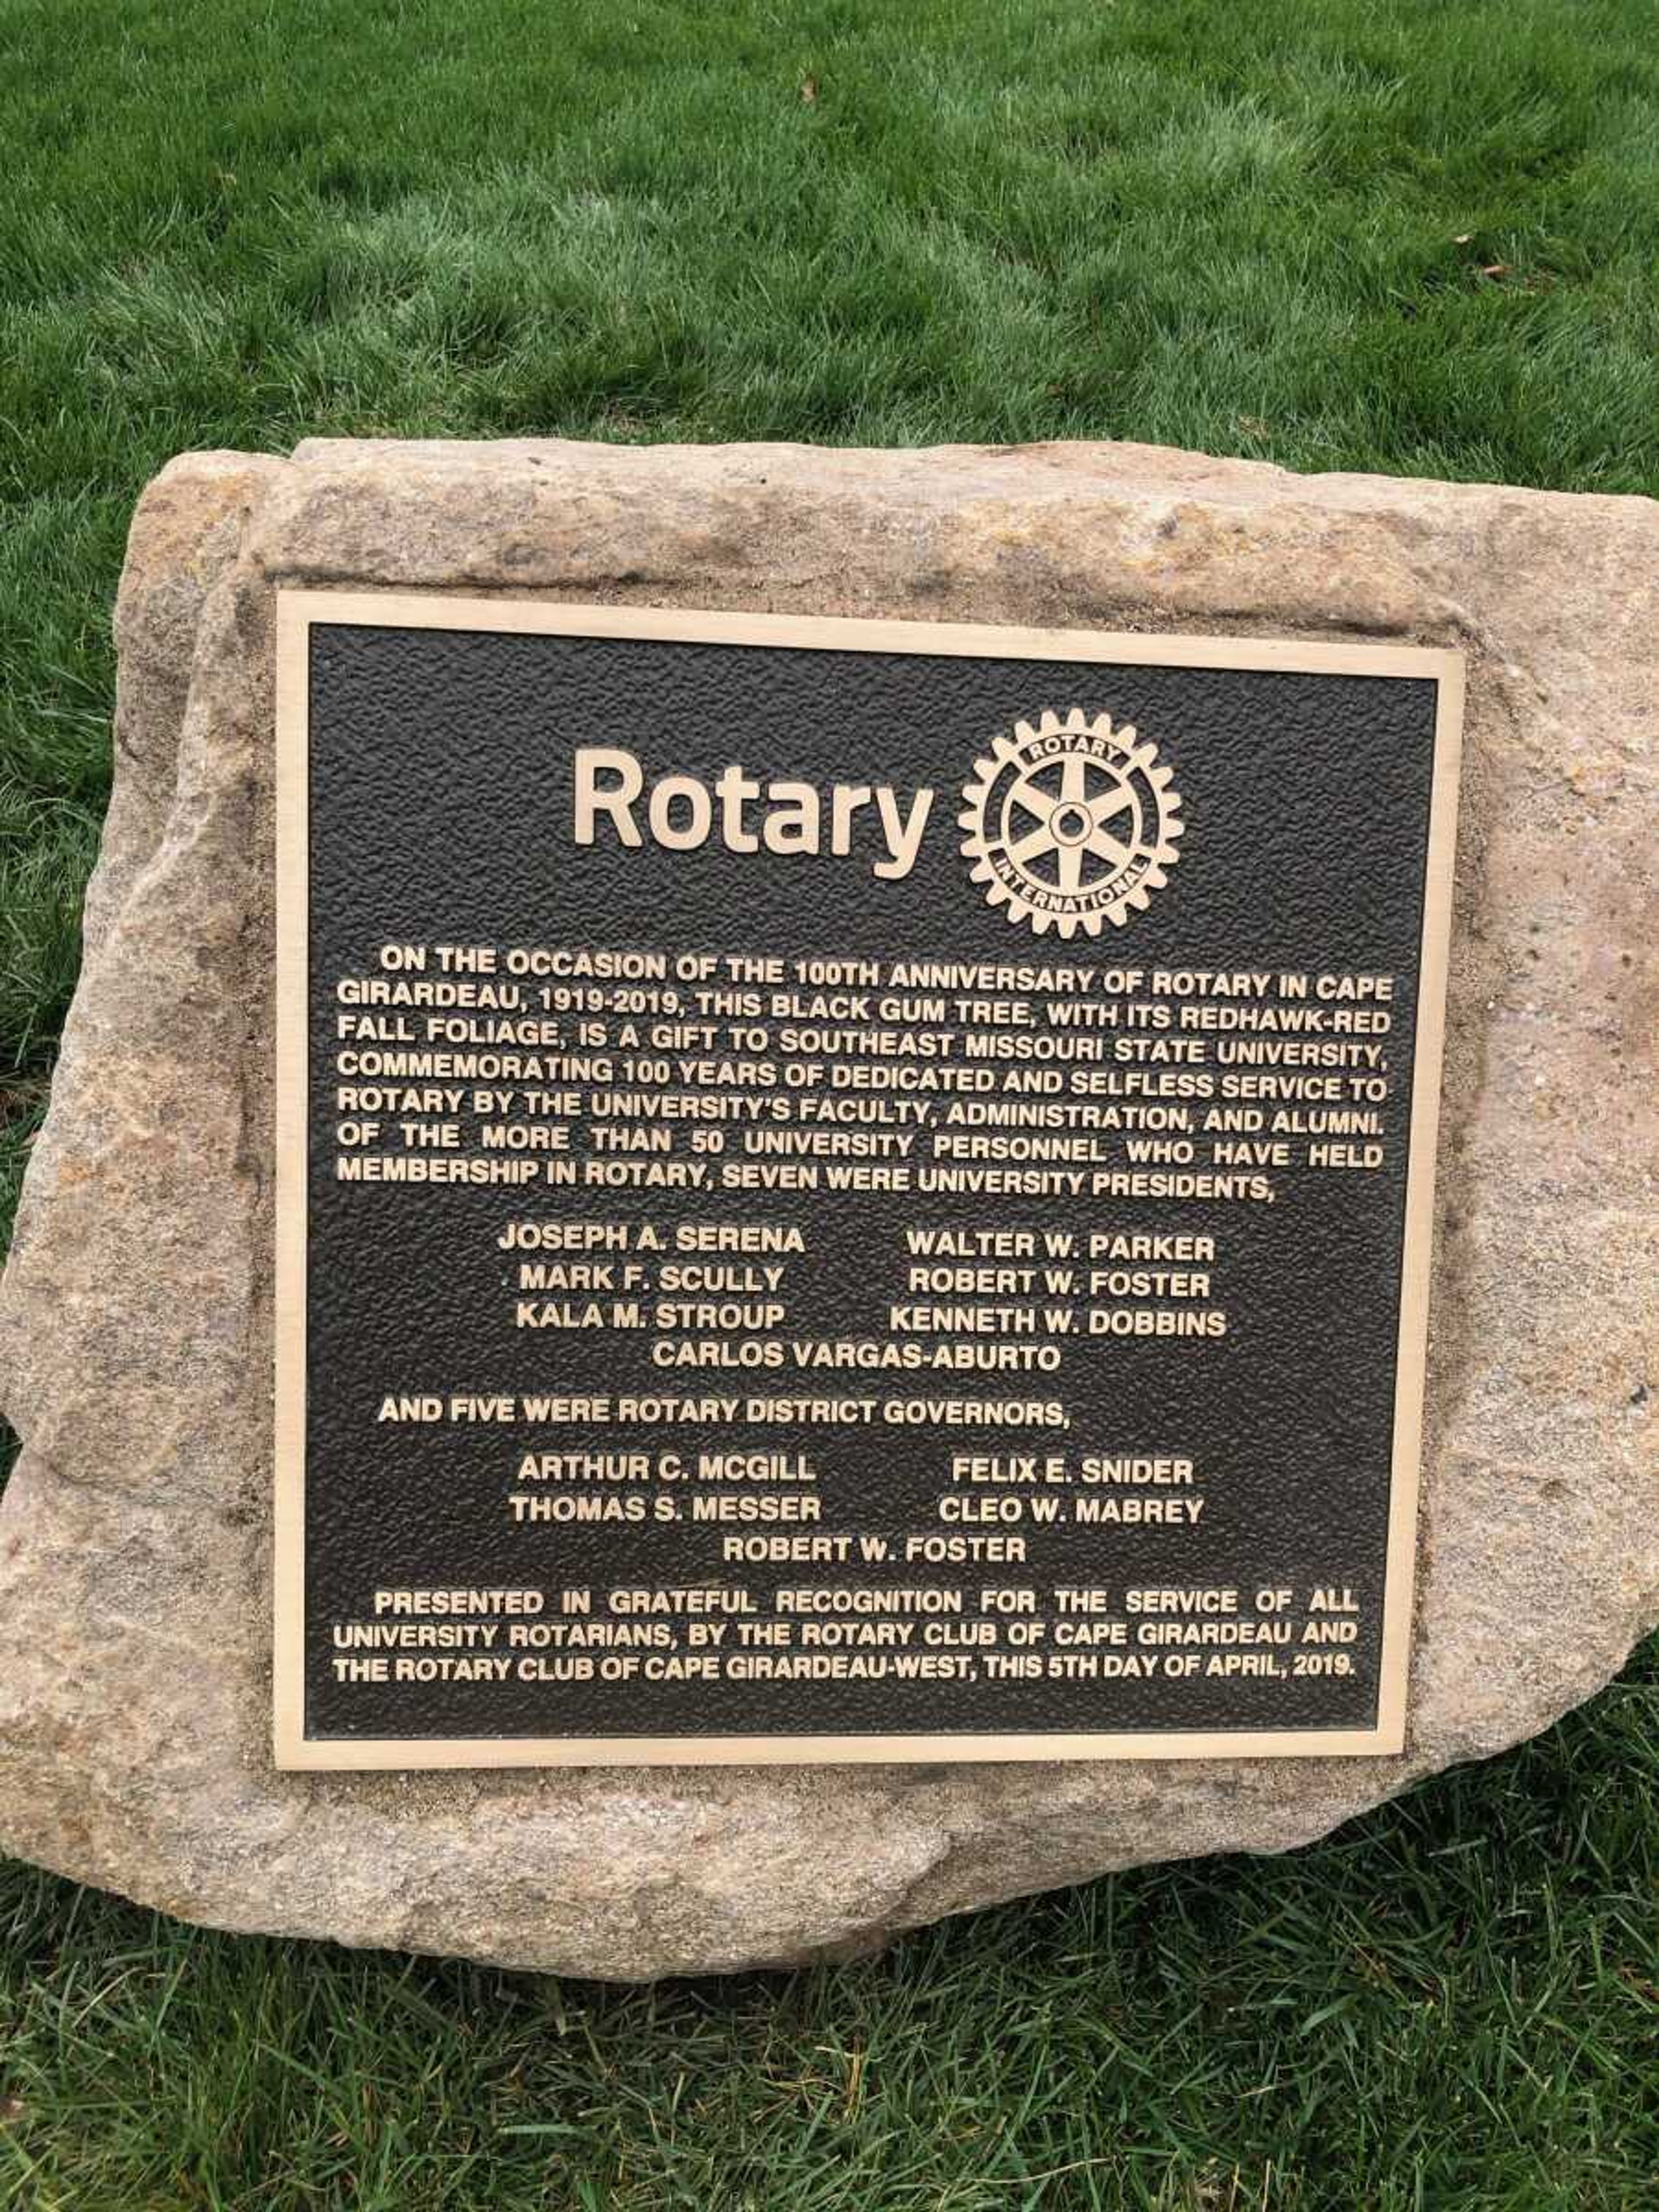 A plaque dedicated along with black gum tree planting to honor a century of service in the community from the local branch of the Rotary Club.